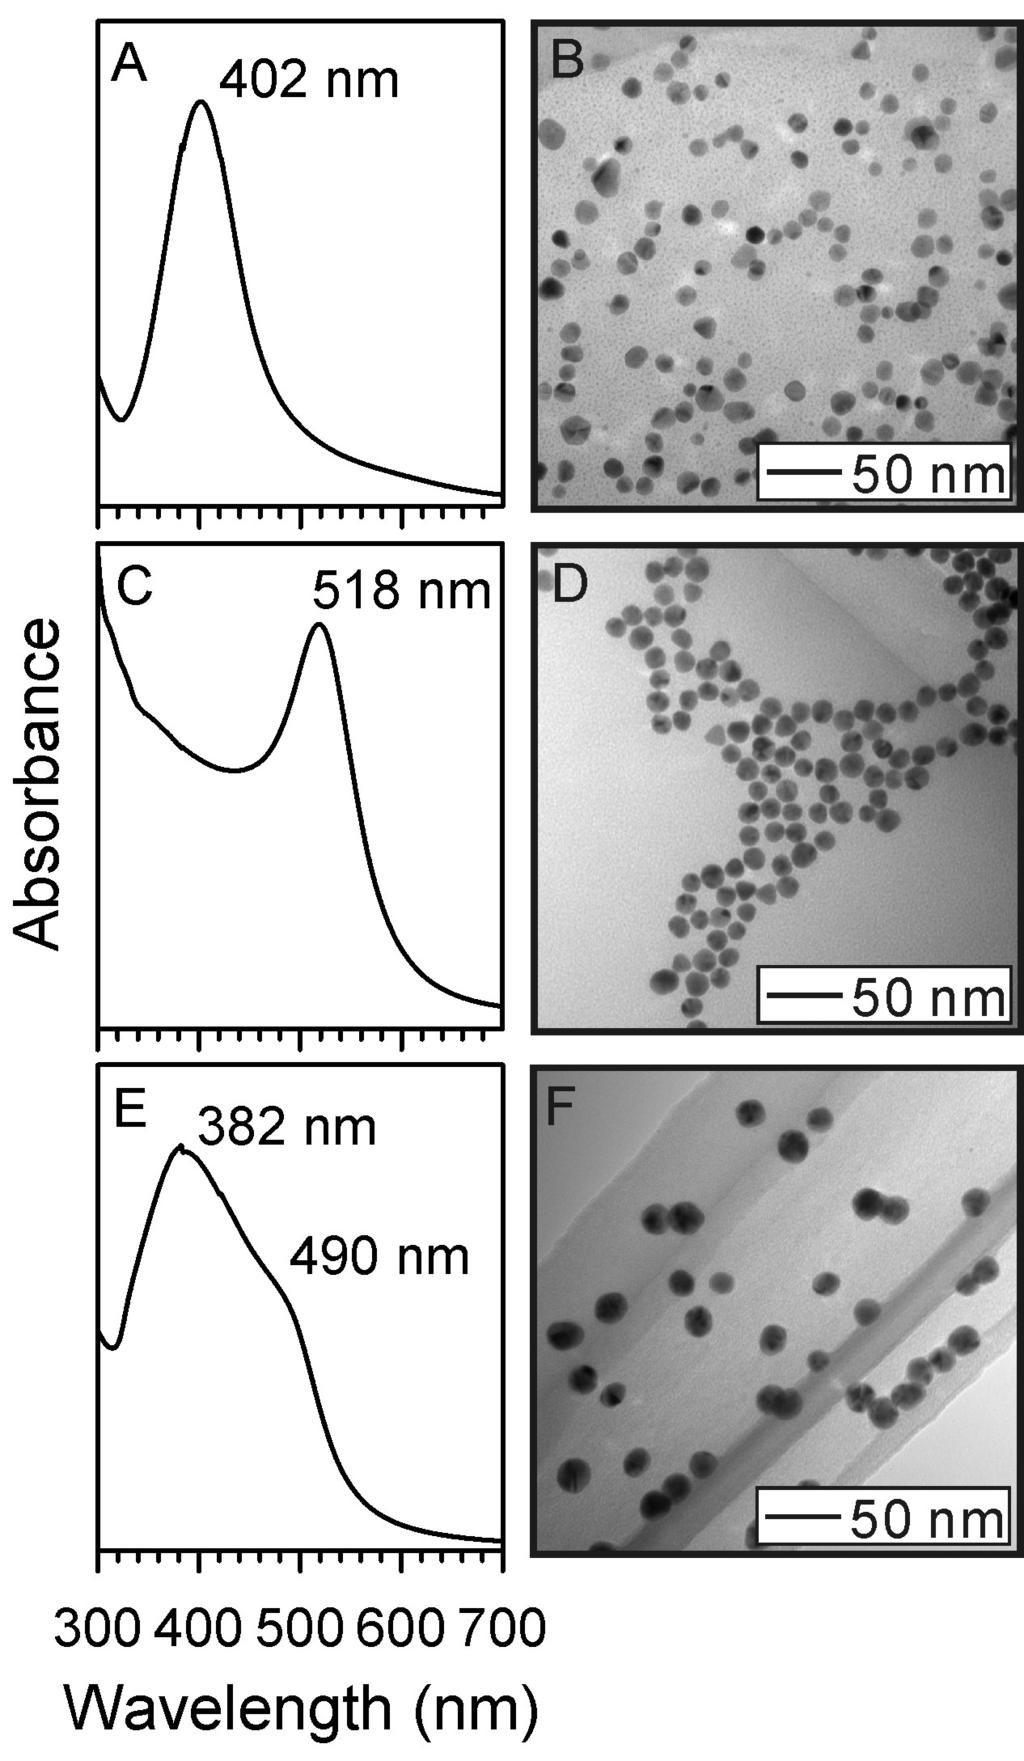 Figure 1. Representative UV-Vis spectra and TEM images for Ag (A, B), Au (C, D) and Au@Ag (E, F) assynthesized NPs.